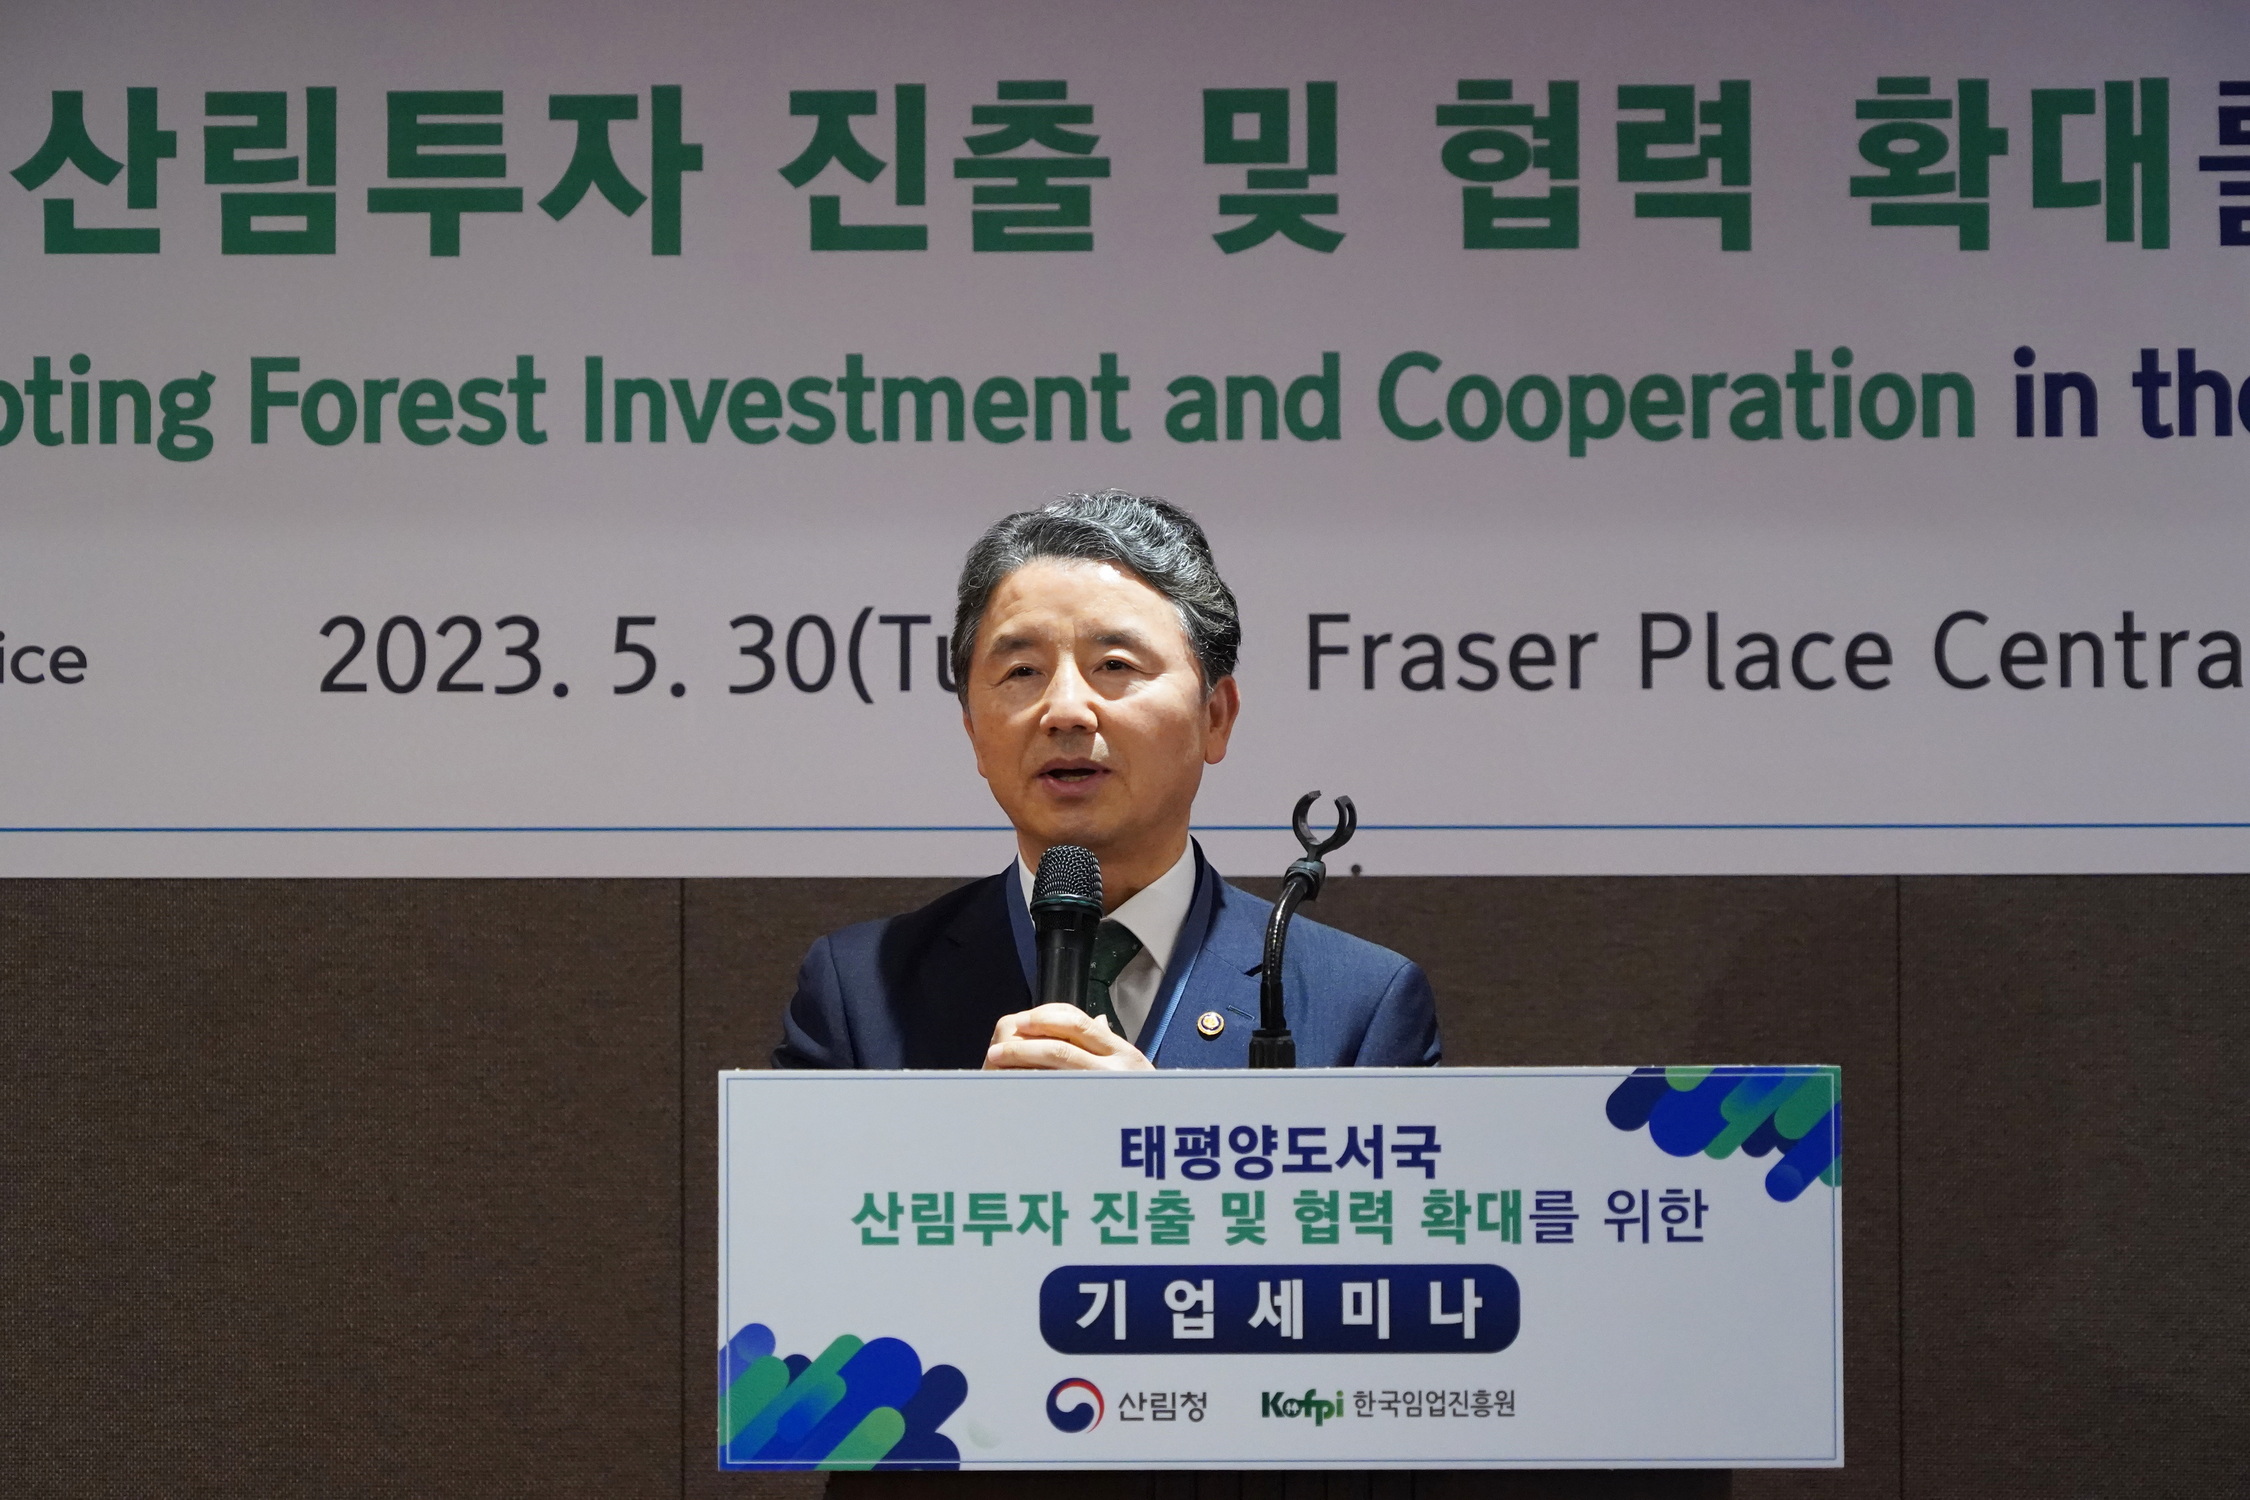 Seminar promoting corporate forest investment 이미지1